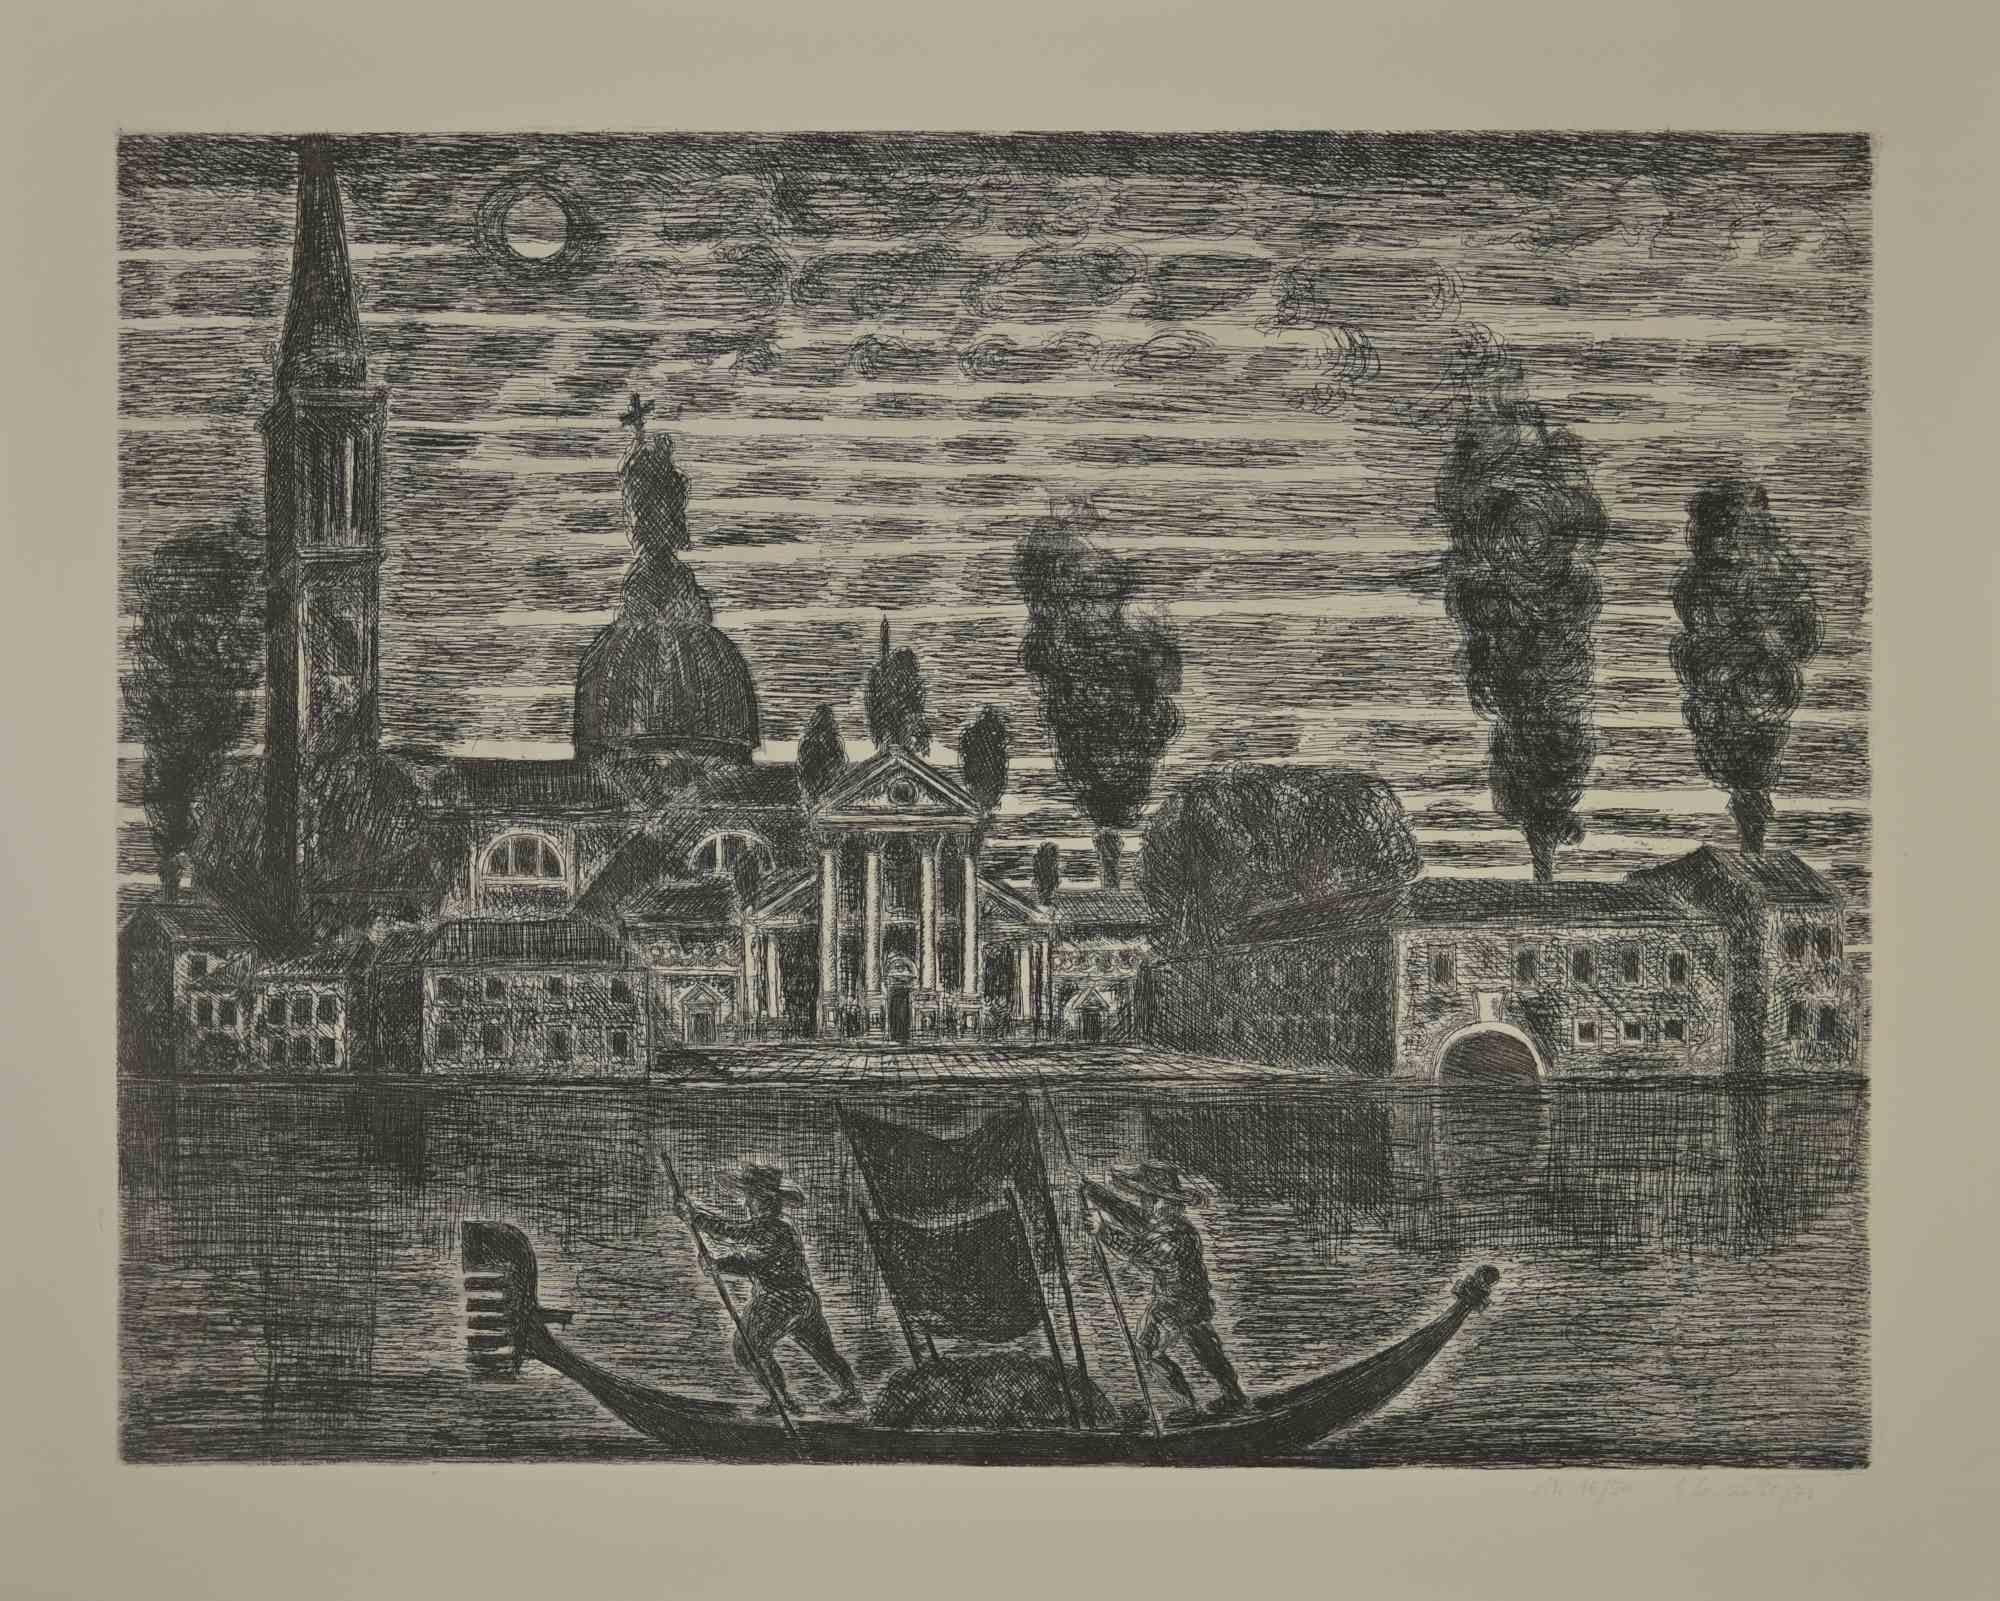 Gondoliers in Venice is an etching realized by Gianpaolo Berto in 1974.

60 X 75 cm , no frame.

Edition 16/50. Numbered and firmed by the artist in the lower margin.

Good conditions.

 

Gianpaolo Berto (1940) was born and raised in the